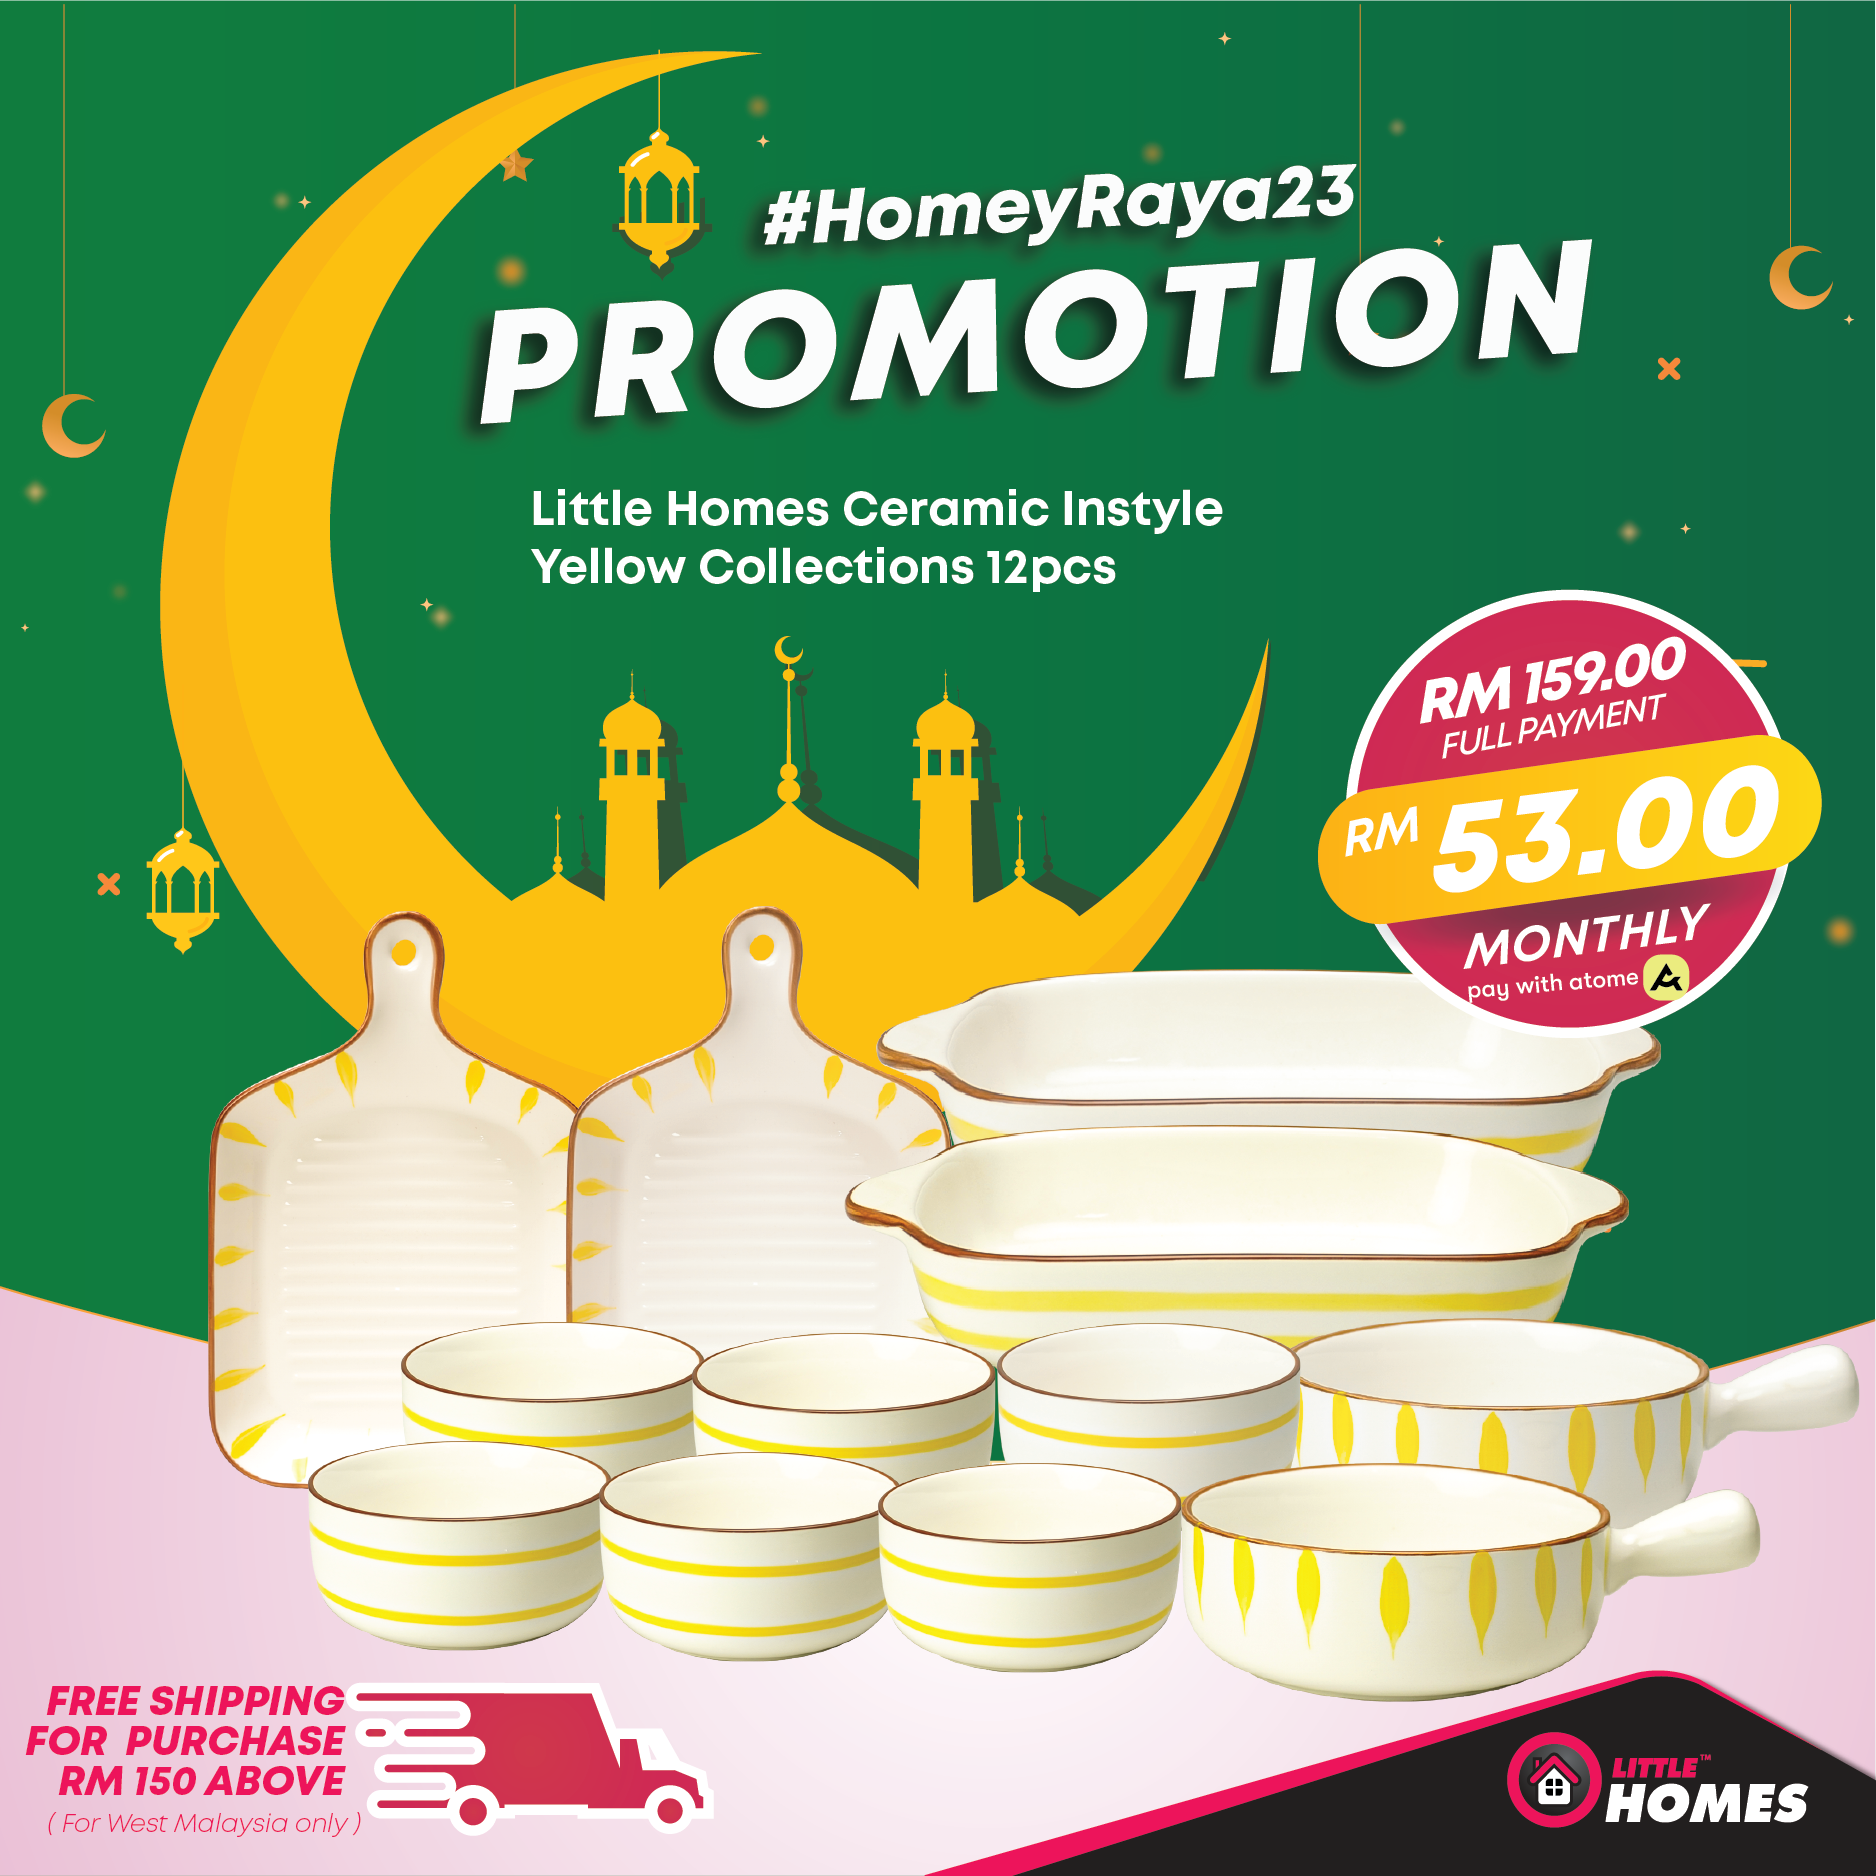 Little Homes Ceramic Instyle Yellow Collections 12pcs Set Homeyraya23 Promotion RM159 *Available for RM53.00 of 3payments with Atome*